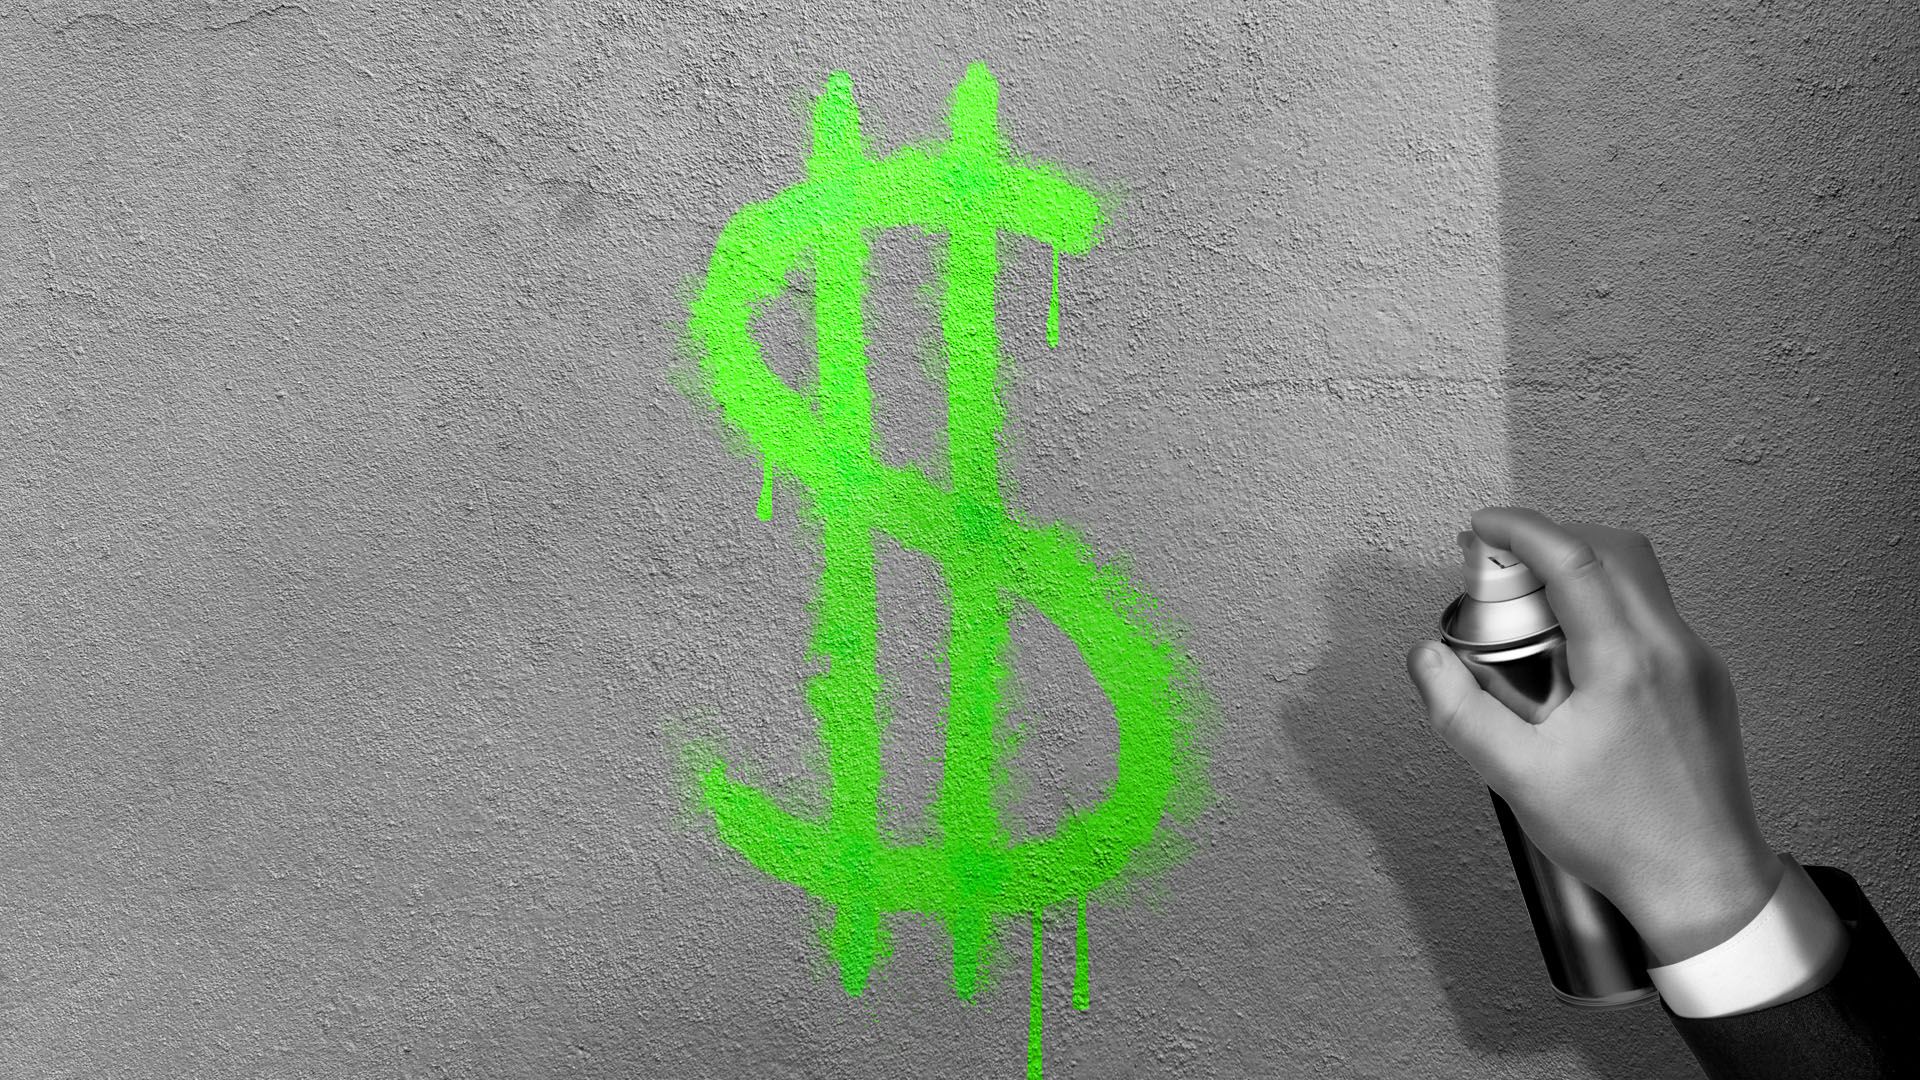 Illustration of a hand in a business suit spray painting a dollar sign on a wall